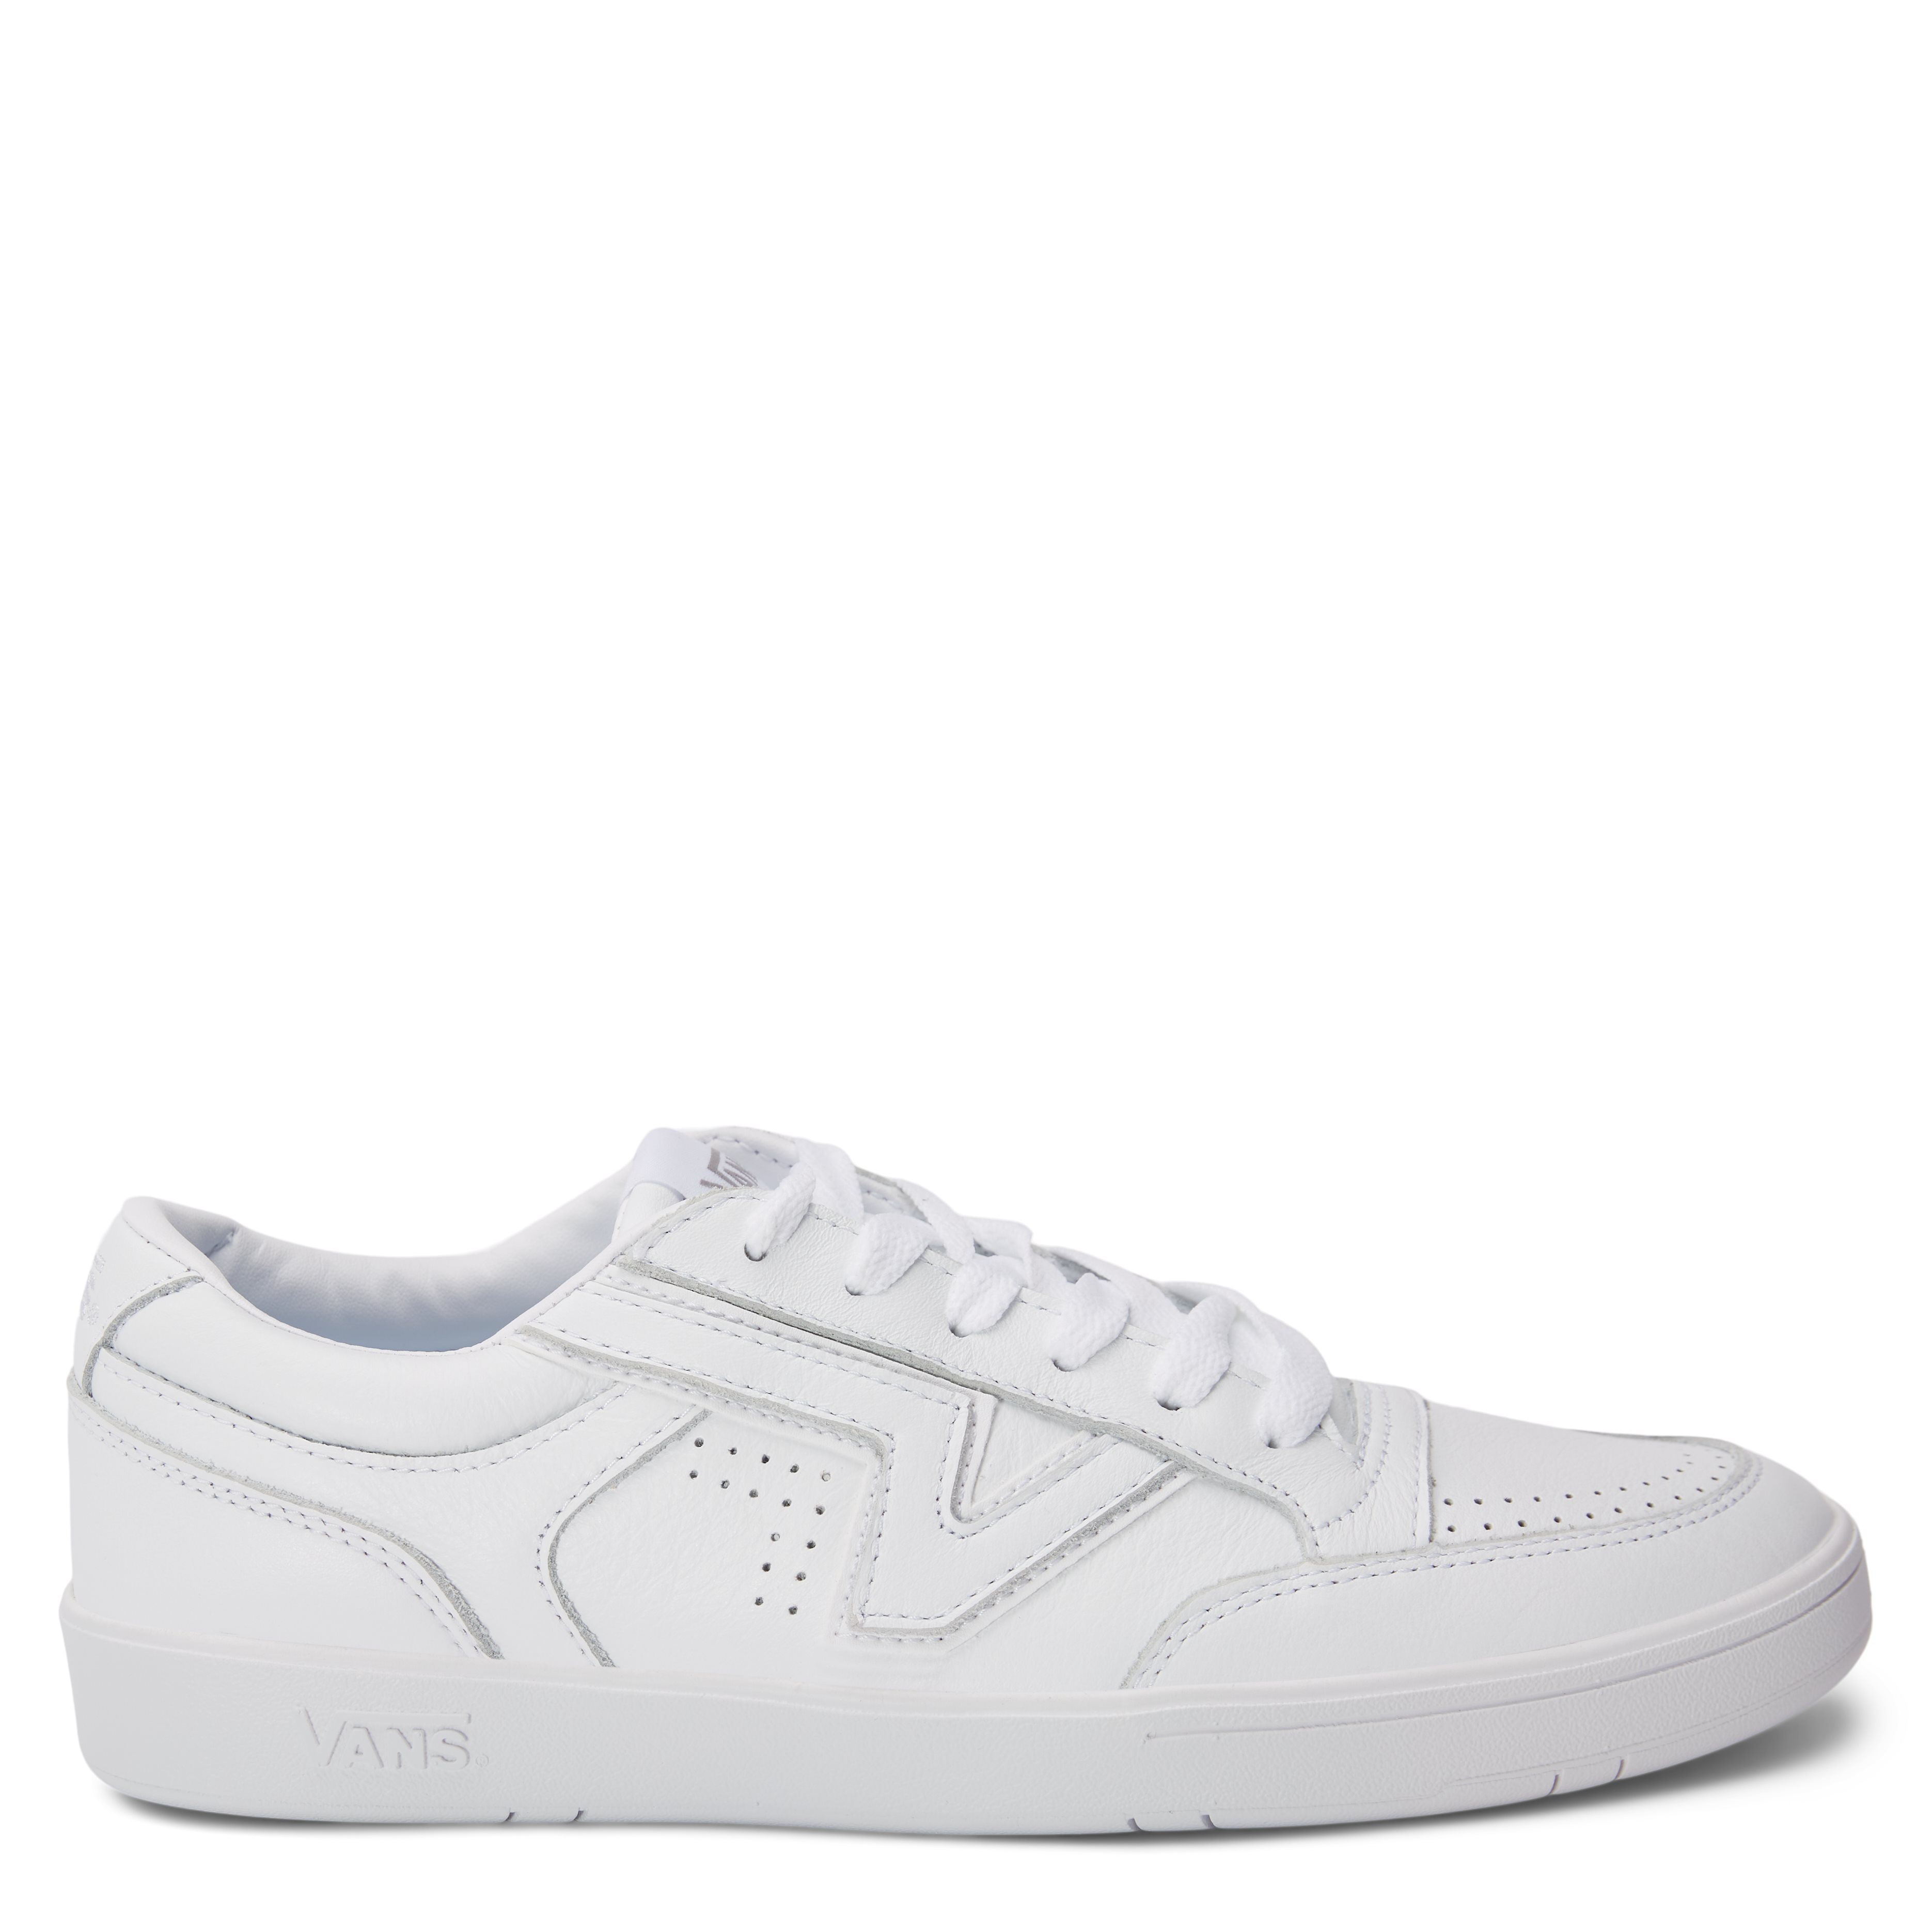 Lowland Sneakers - Shoes - White